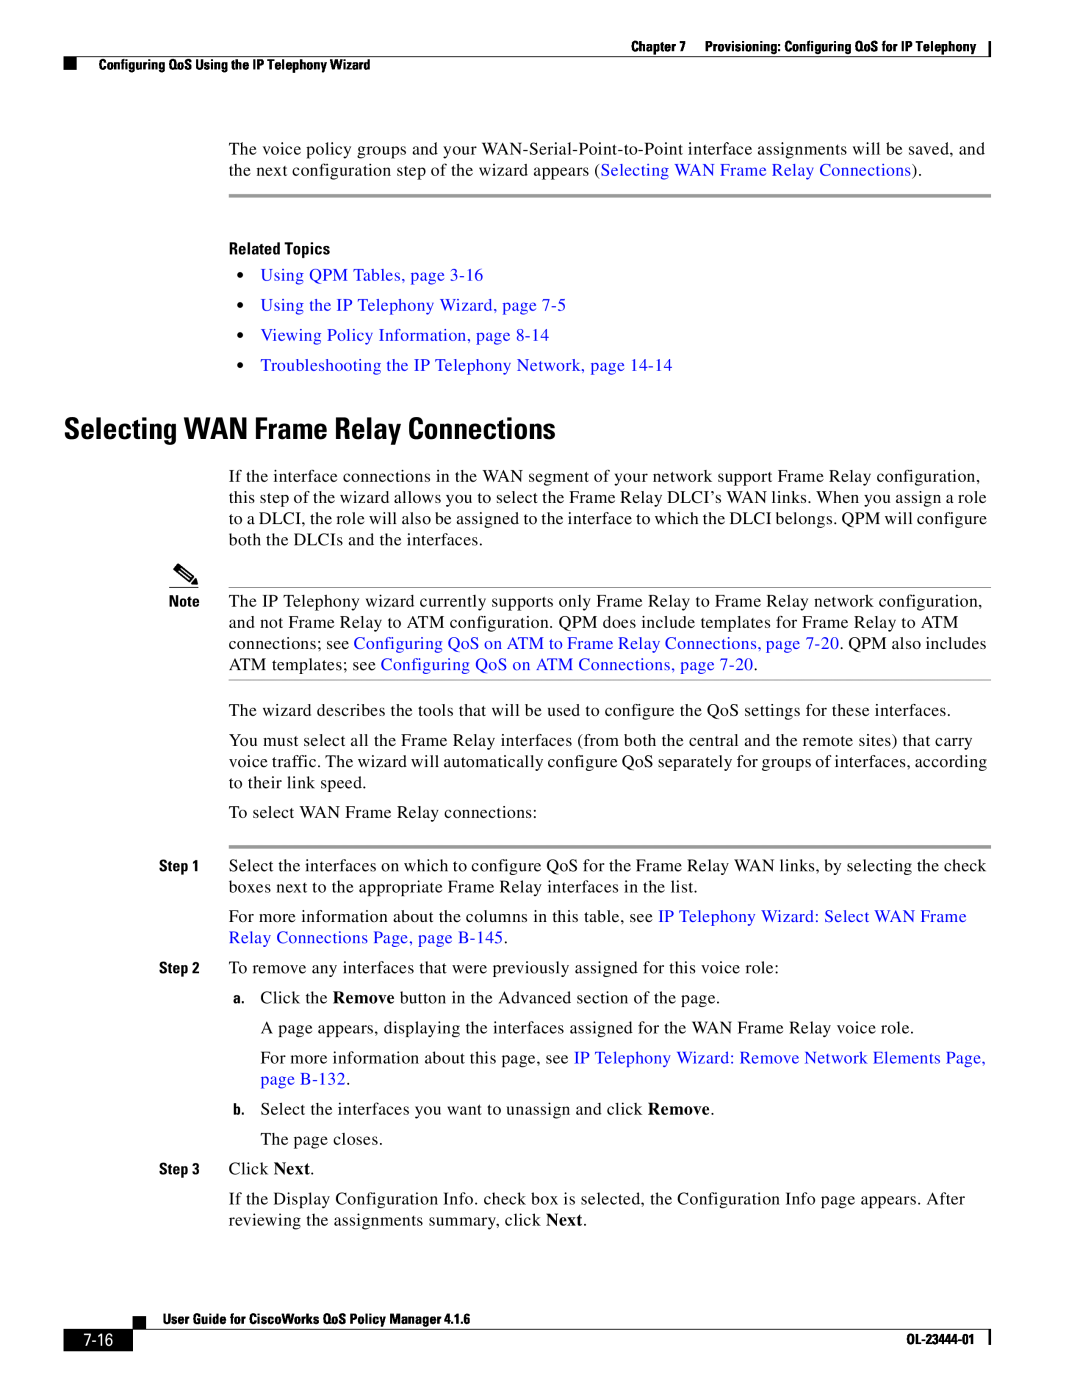 Cisco Systems 416 manual Selecting WAN Frame Relay Connections, 7-16, Related Topics, Viewing Policy Information, page 